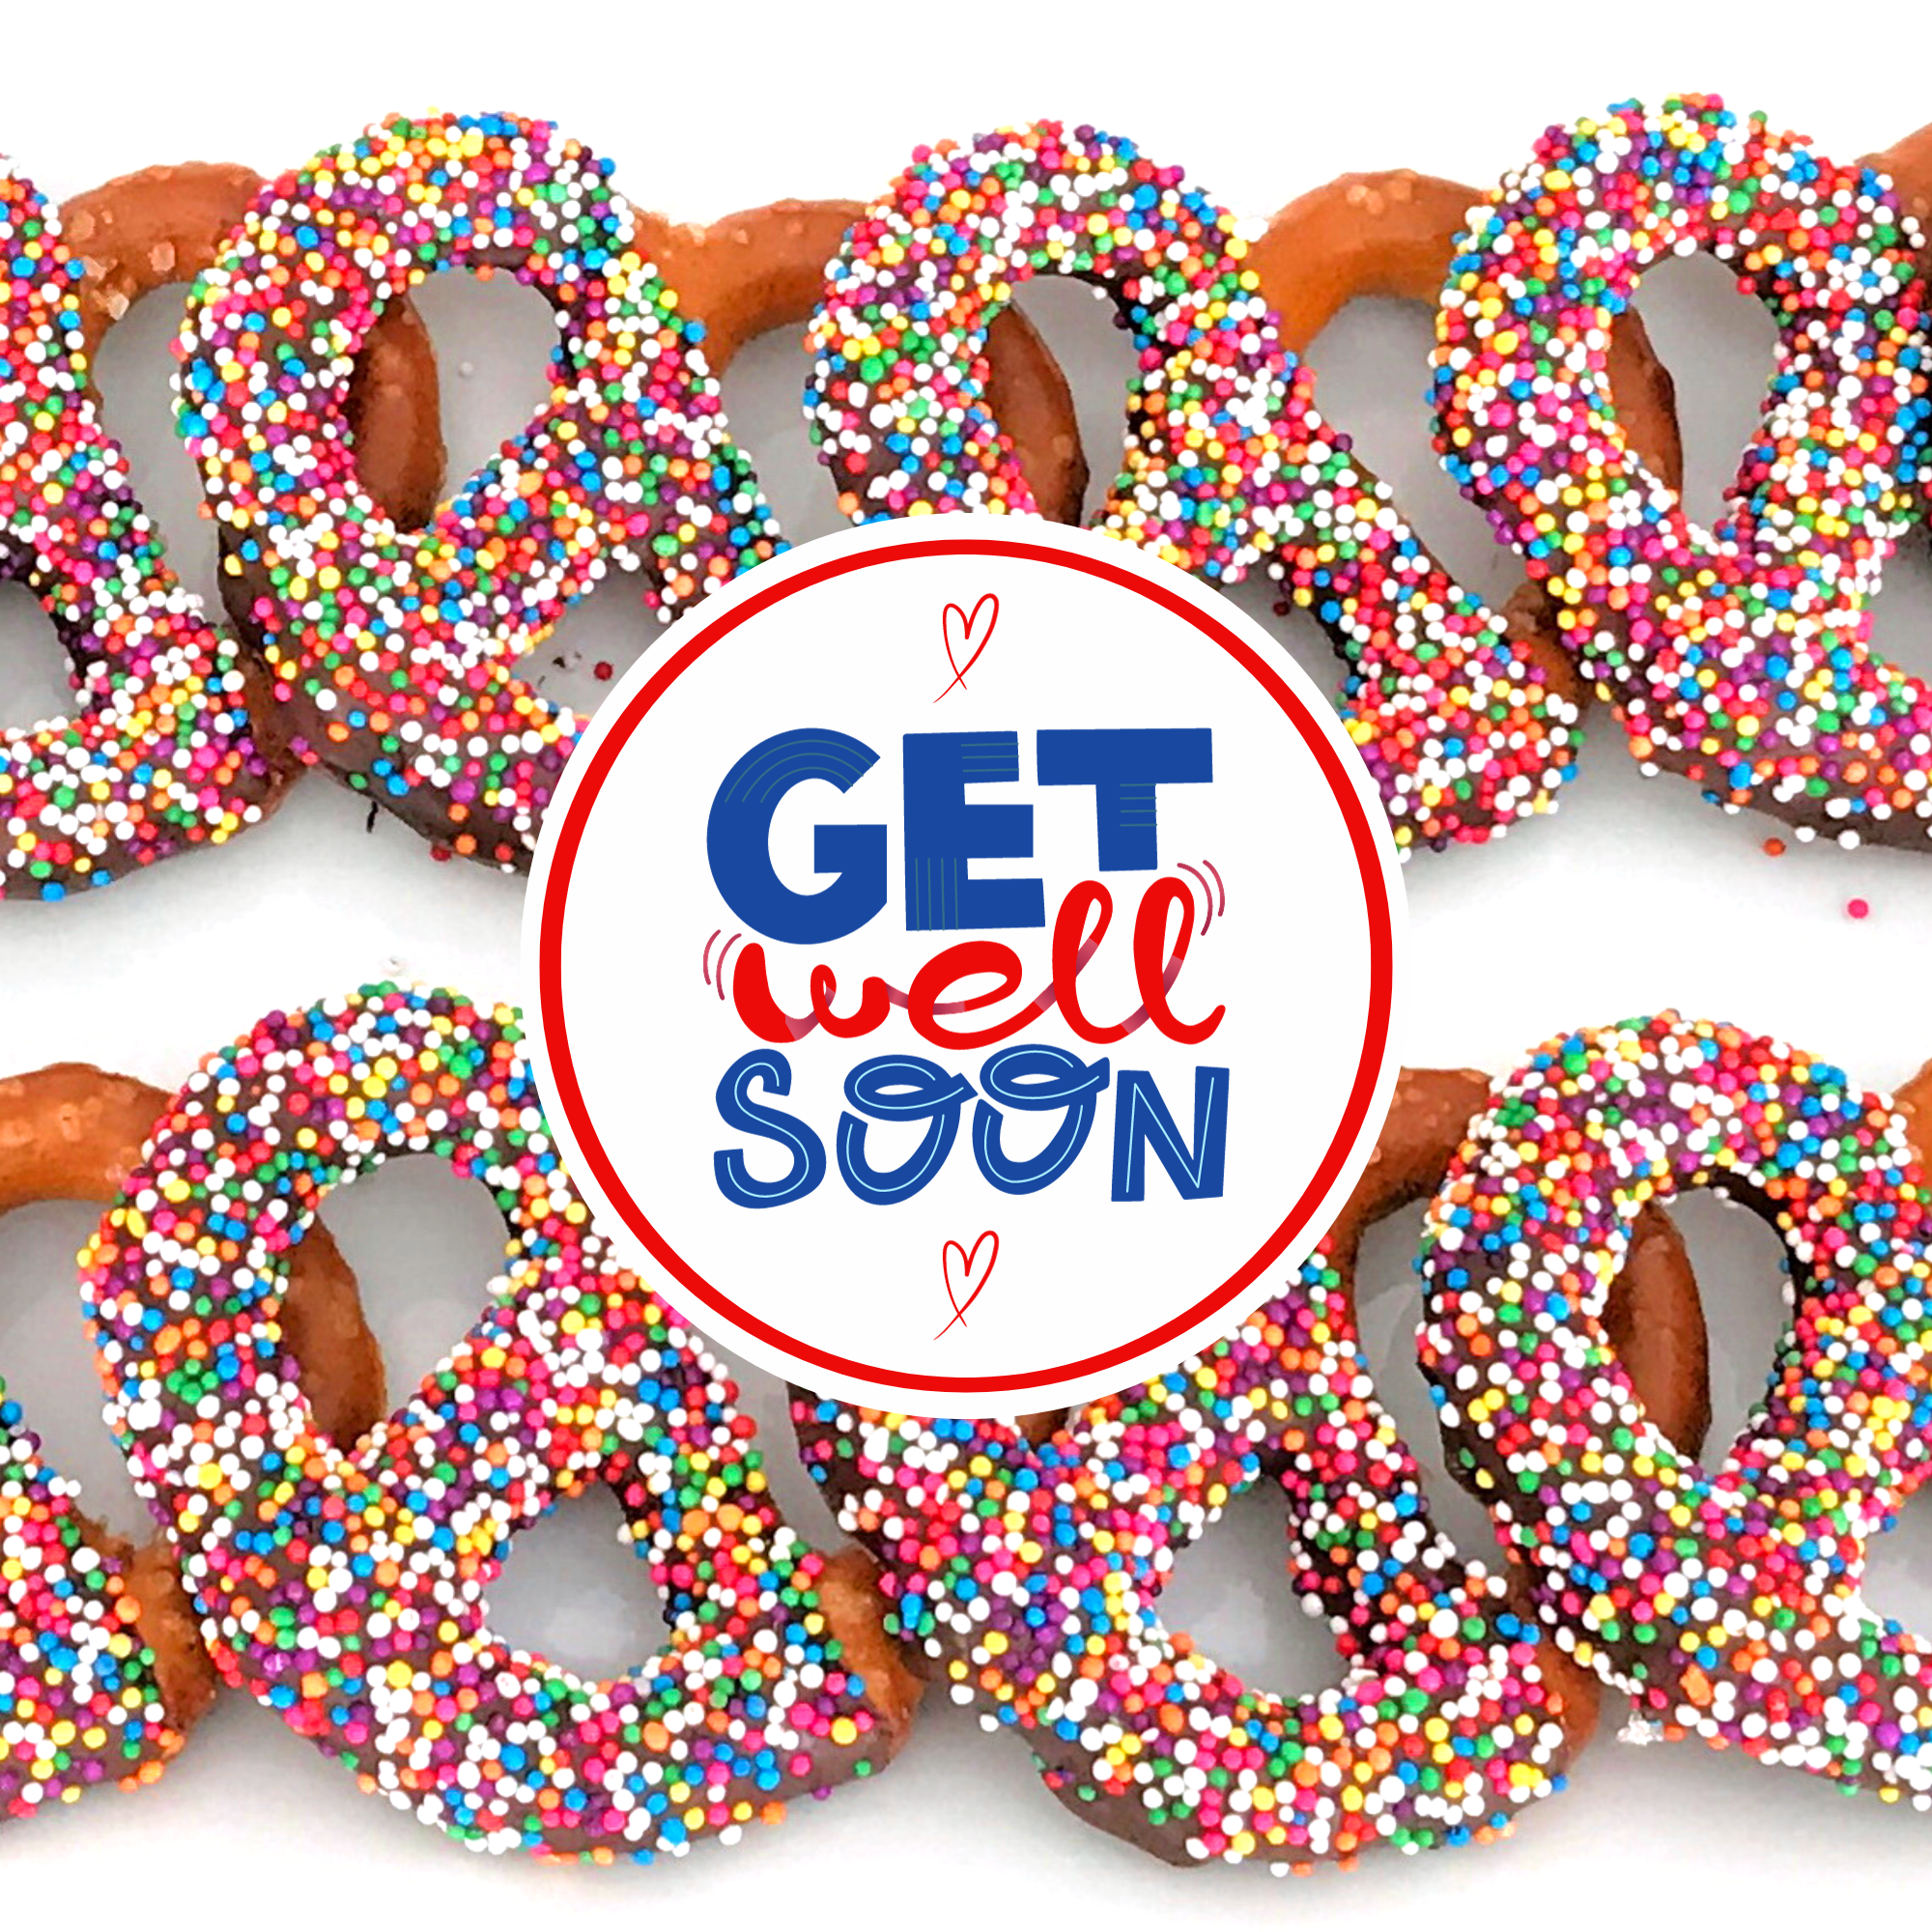 Get Well Chocolate Covered Jumbo Pretzels